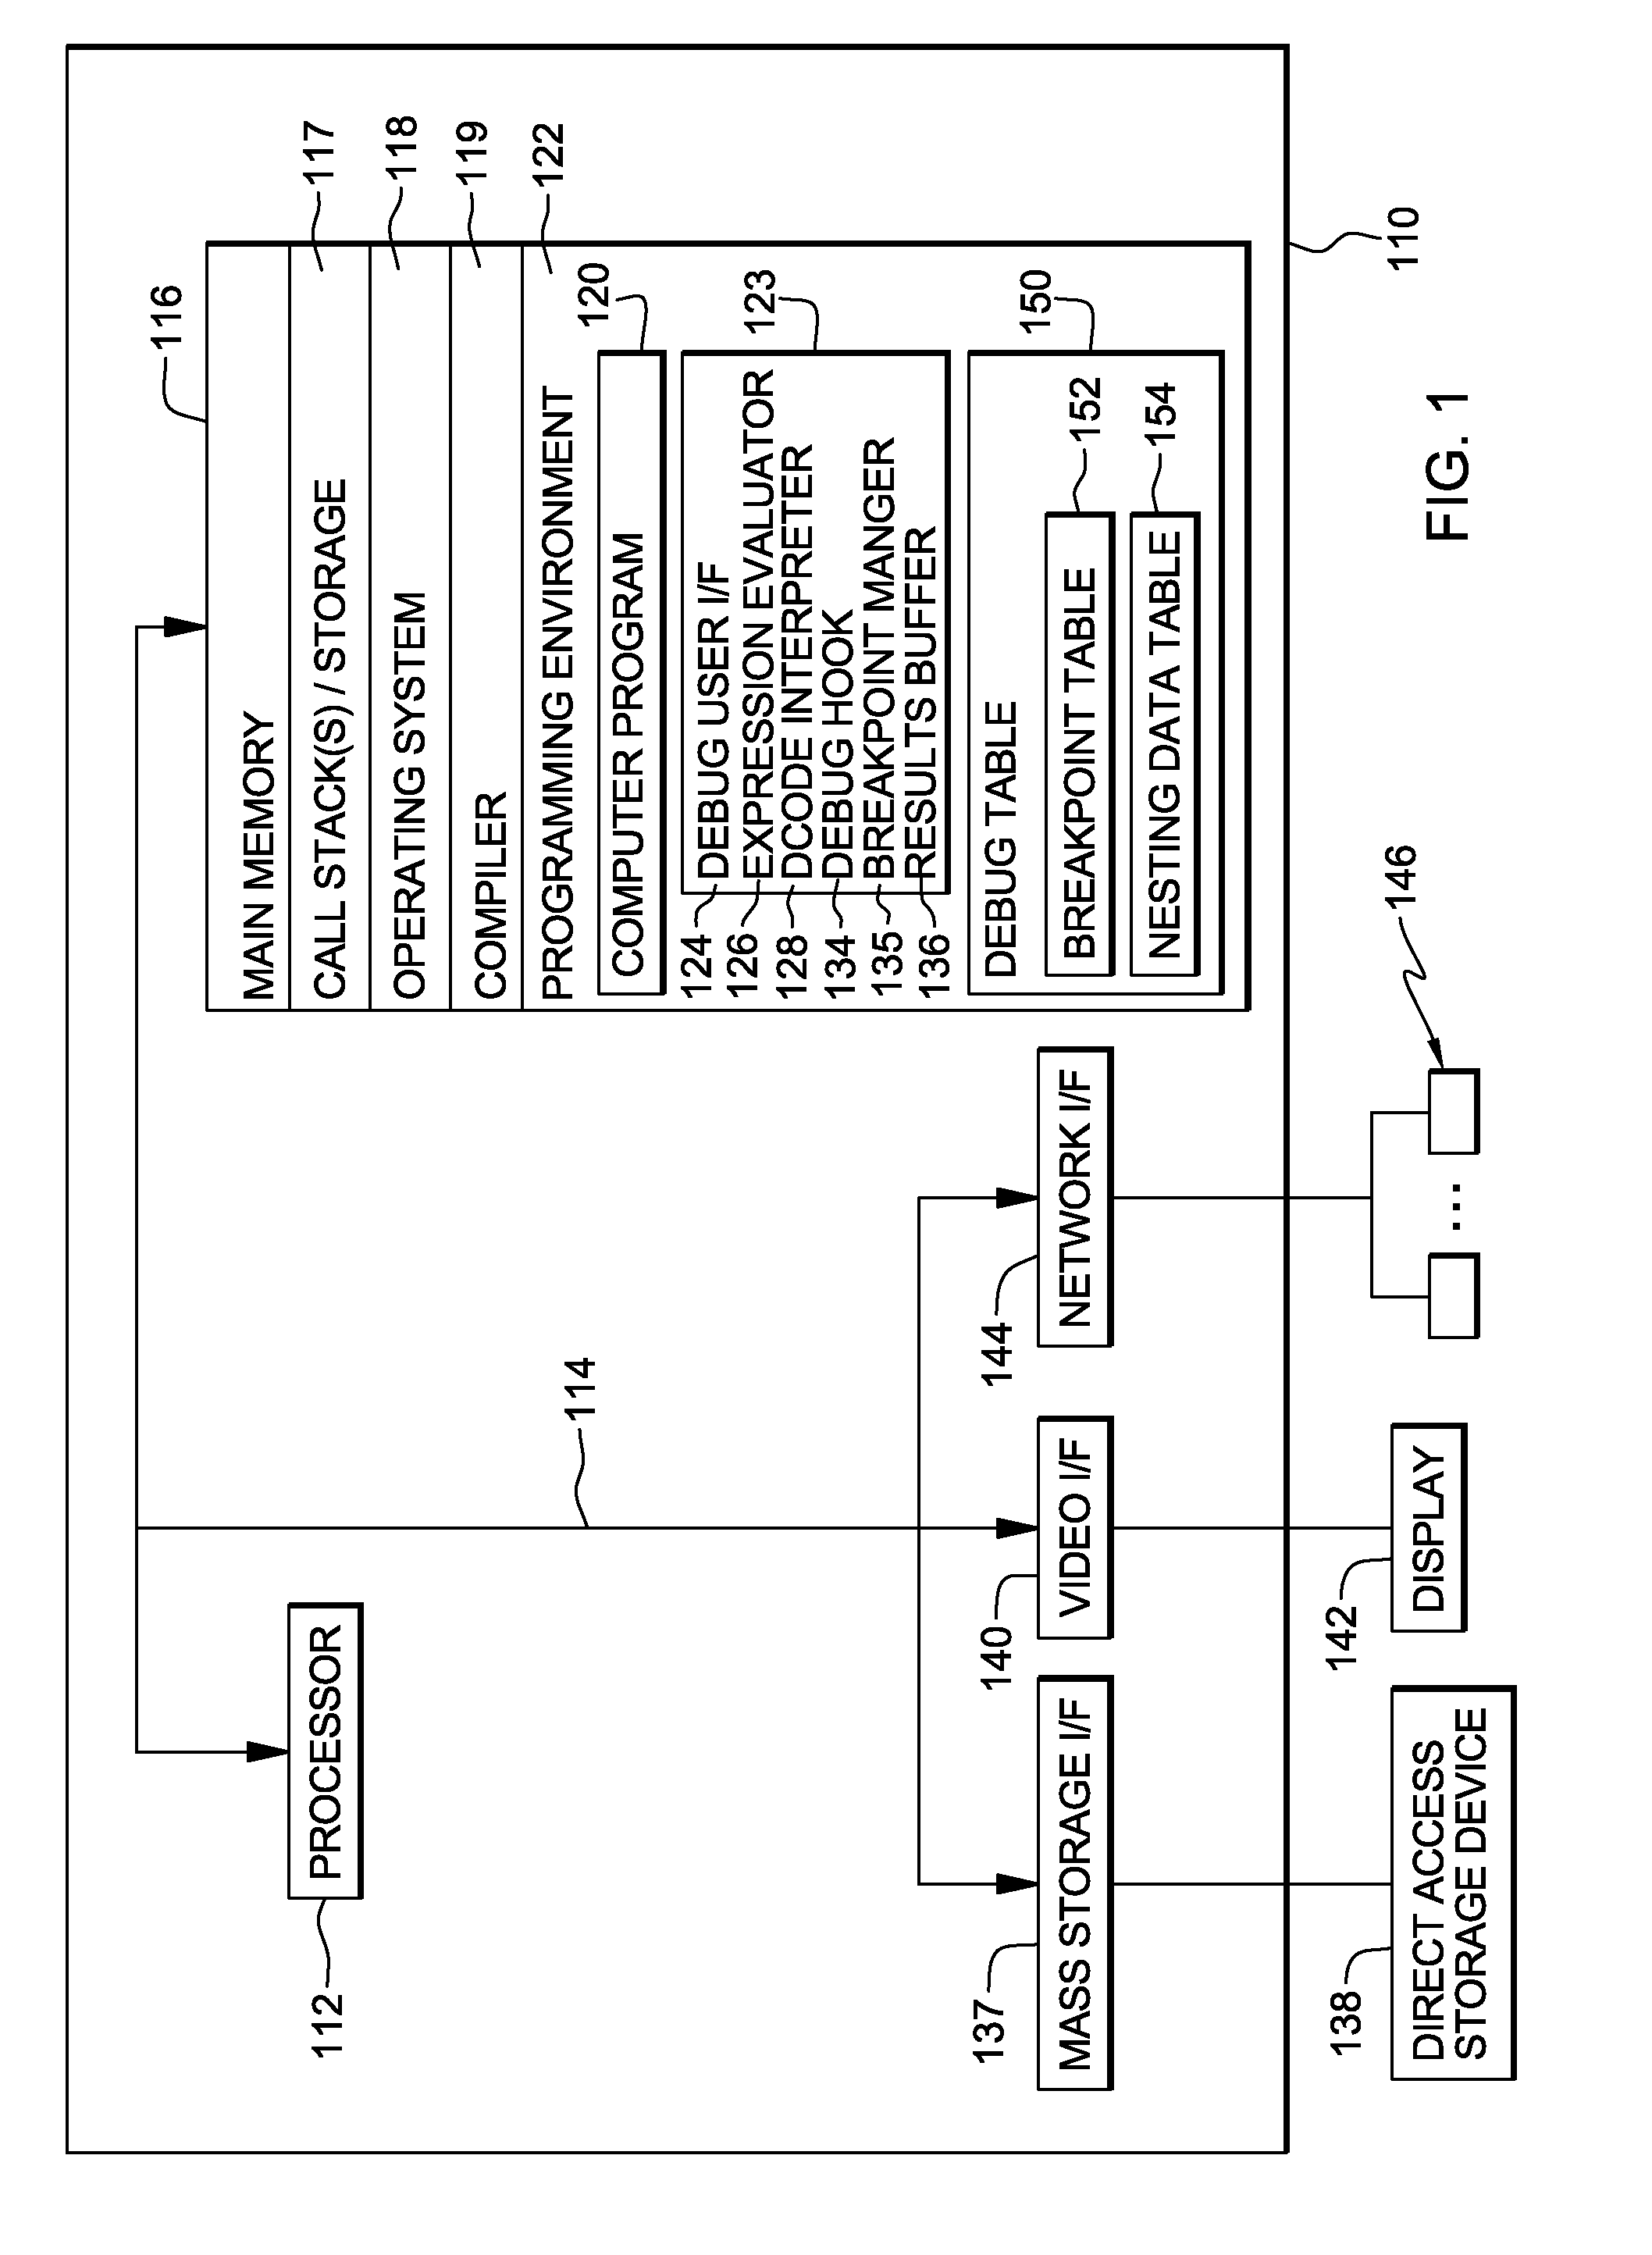 Step-type operation processing during debugging by machine instruction stepping concurrent with setting breakpoints